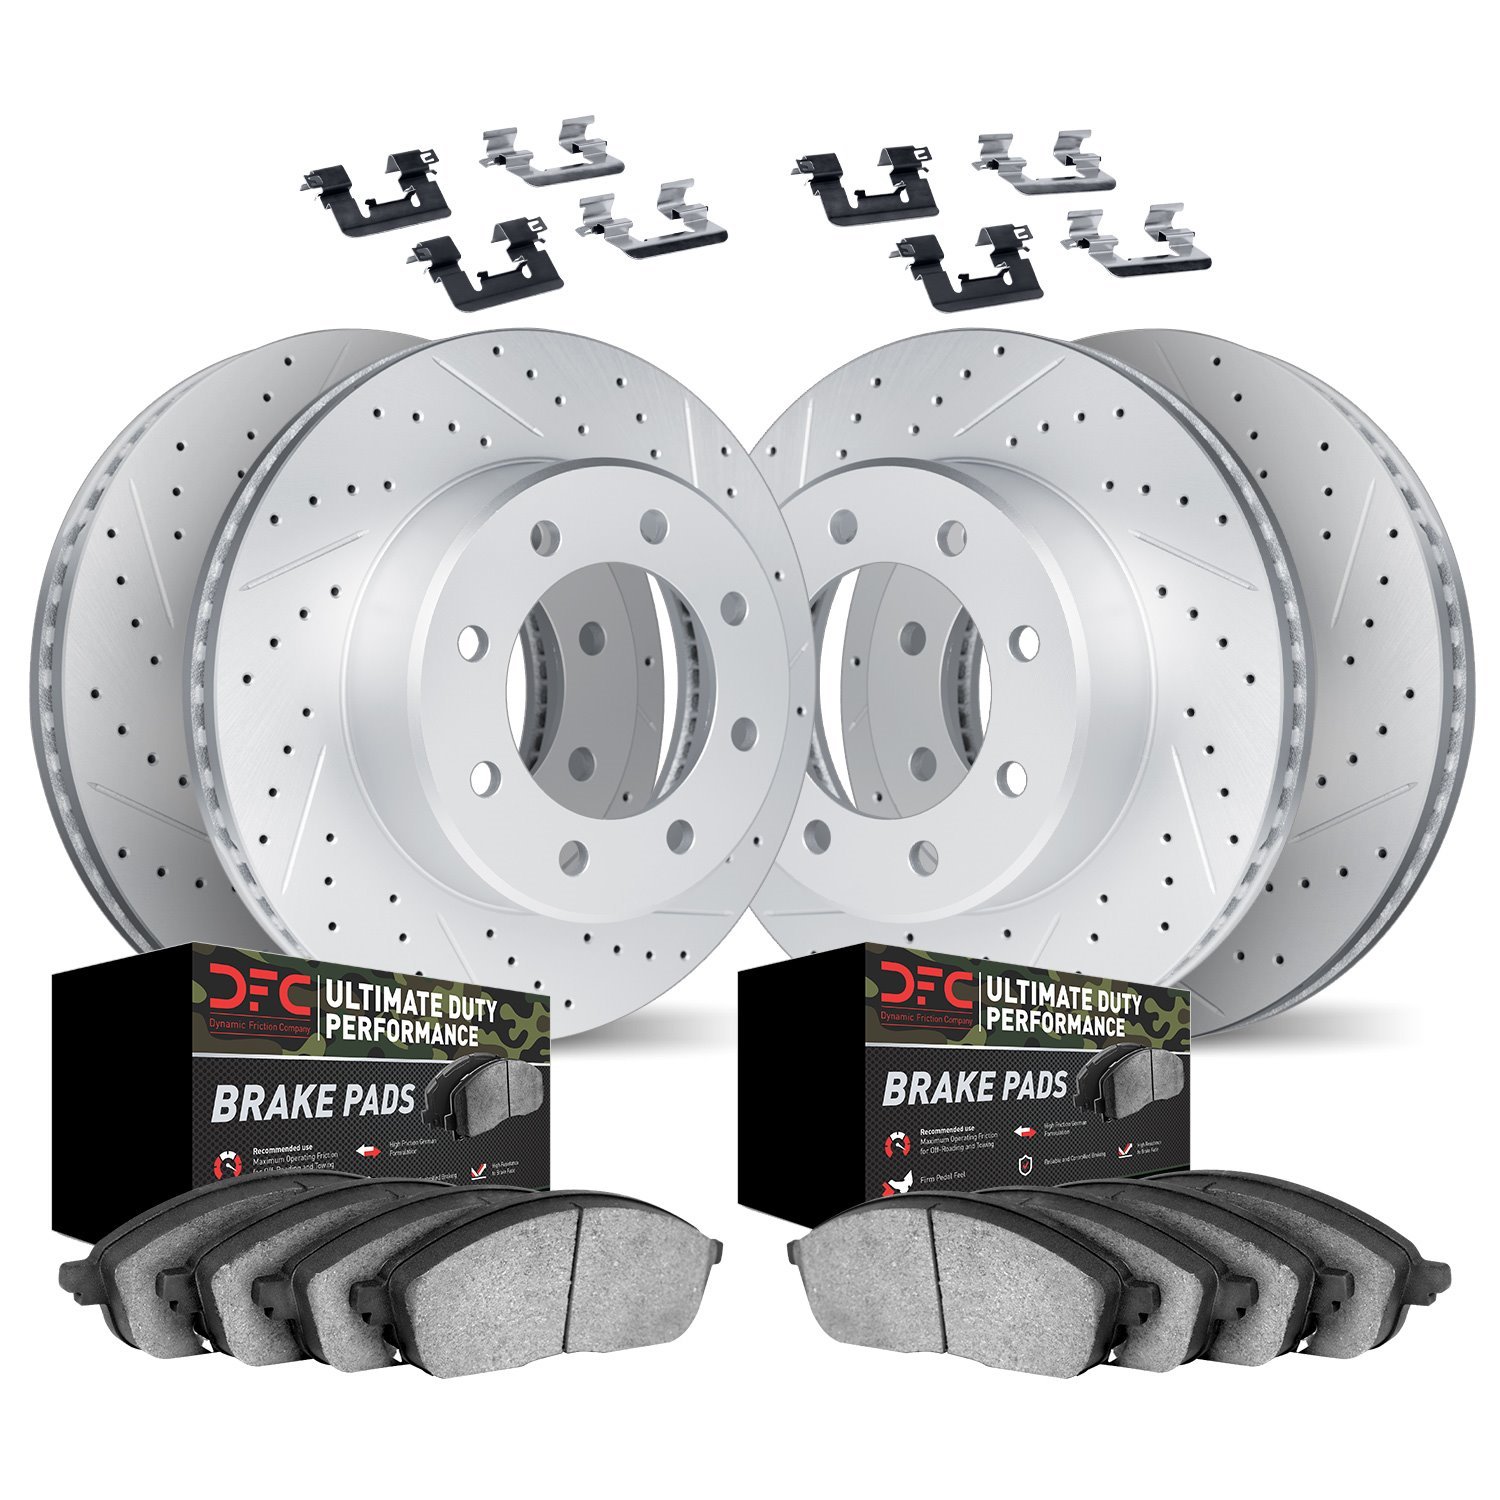 2414-54037 Geoperformance Drilled/Slotted Brake Rotors with Ultimate-Duty Brake Pads Kit & Hardware, 2010-2012 Ford/Lincoln/Merc